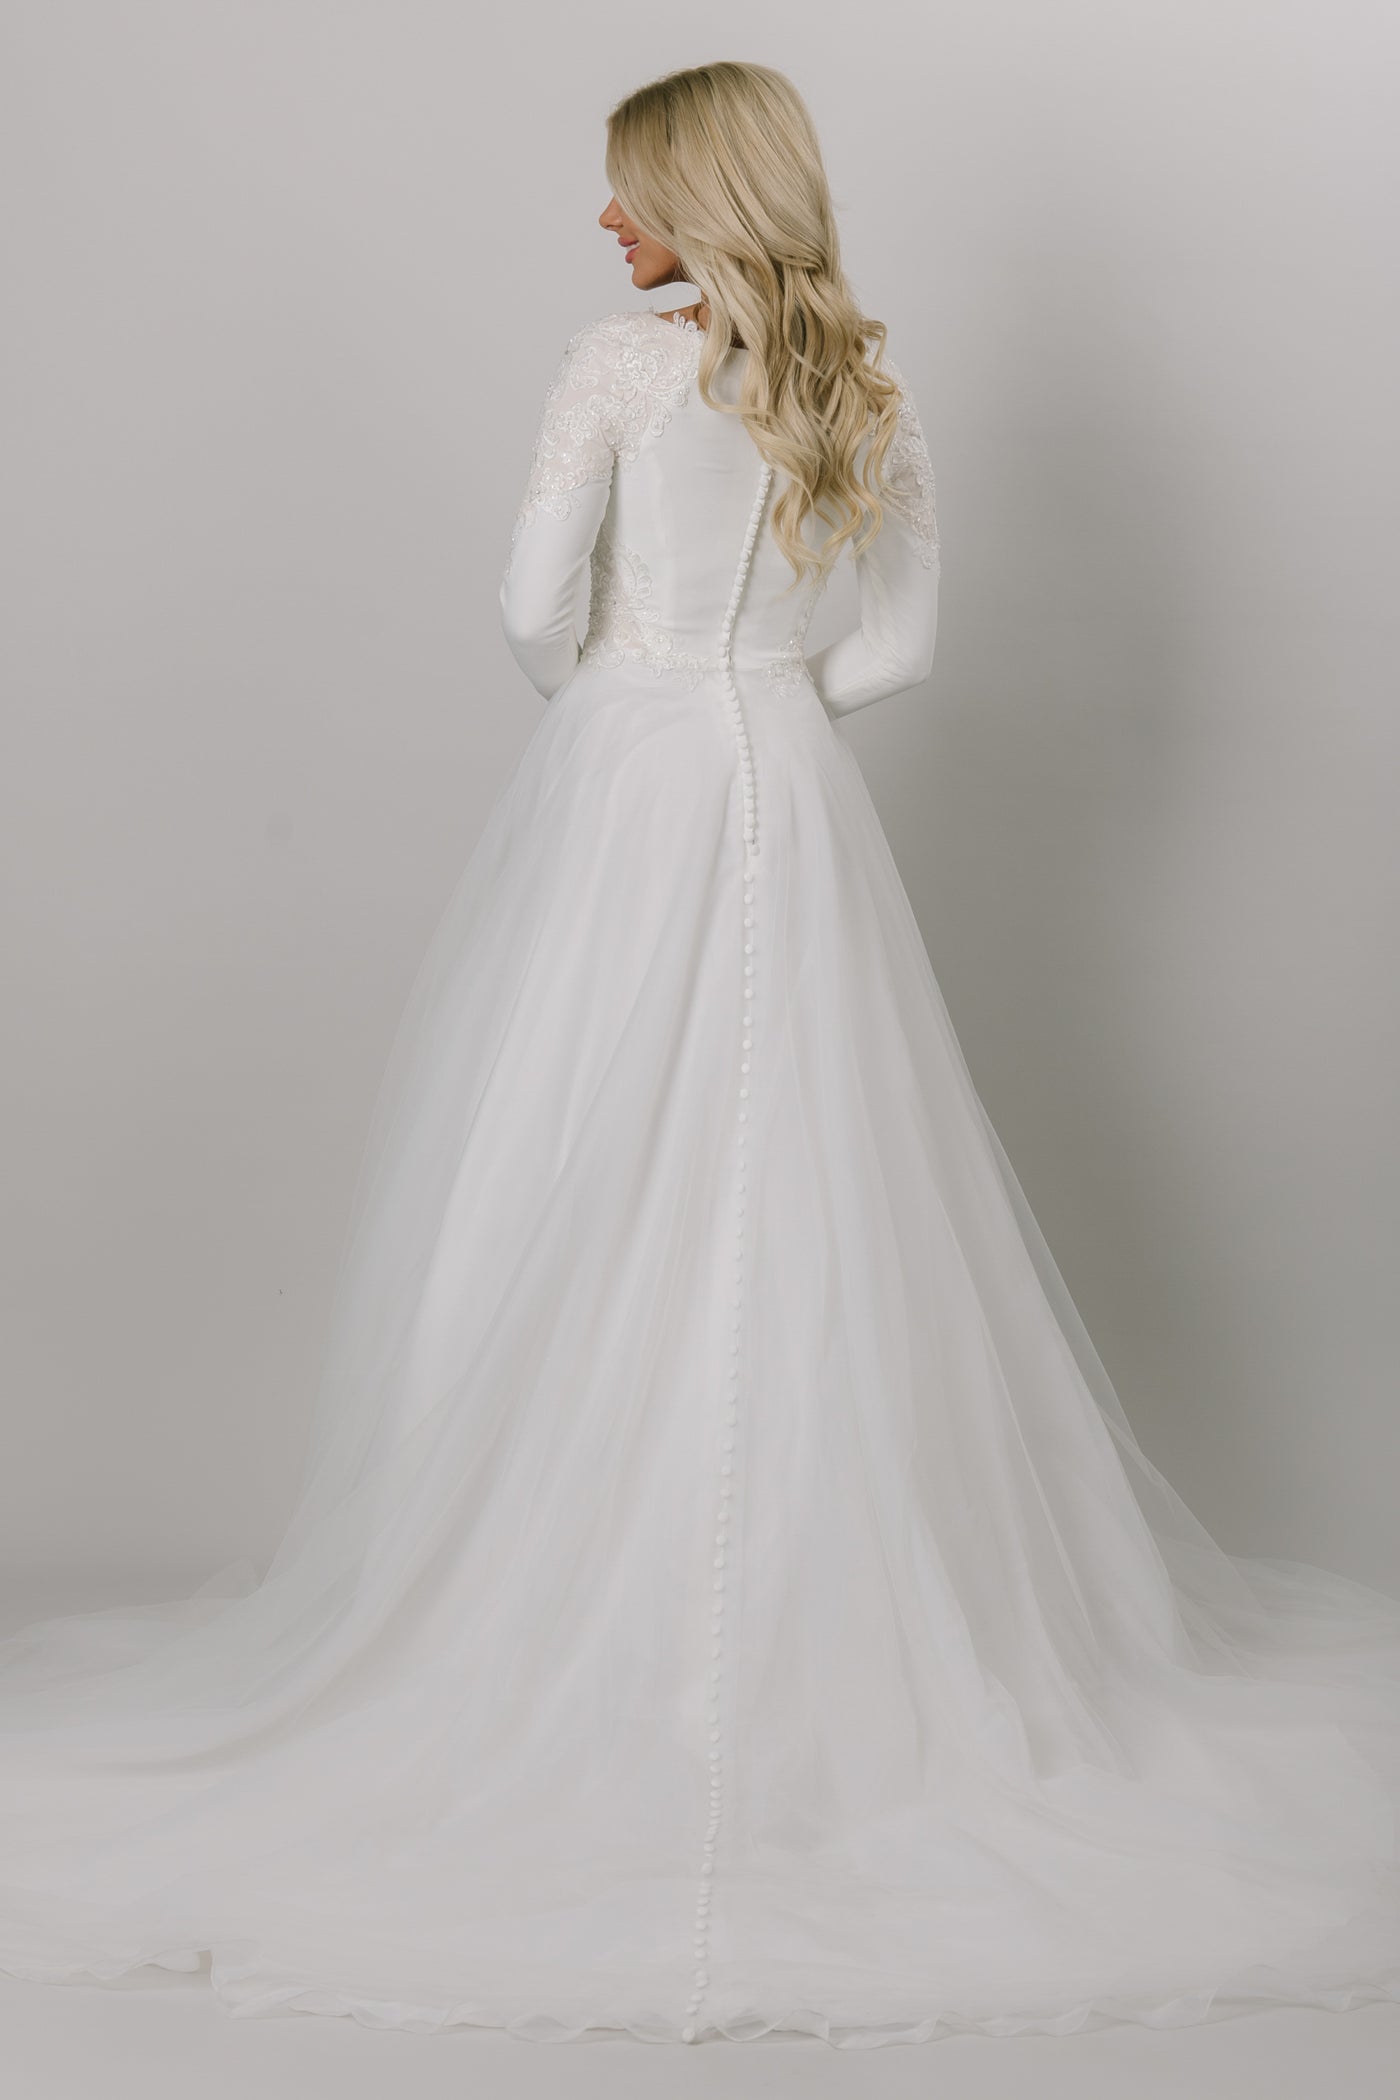 Back view of this Moments Made Bridal wedding dress with long sleeves. This modest wedding dress has a high scoop neckline and a-lin fit. This is a perfect wedding dress for those cooler months. It has a zipper covered by buttons down the back.